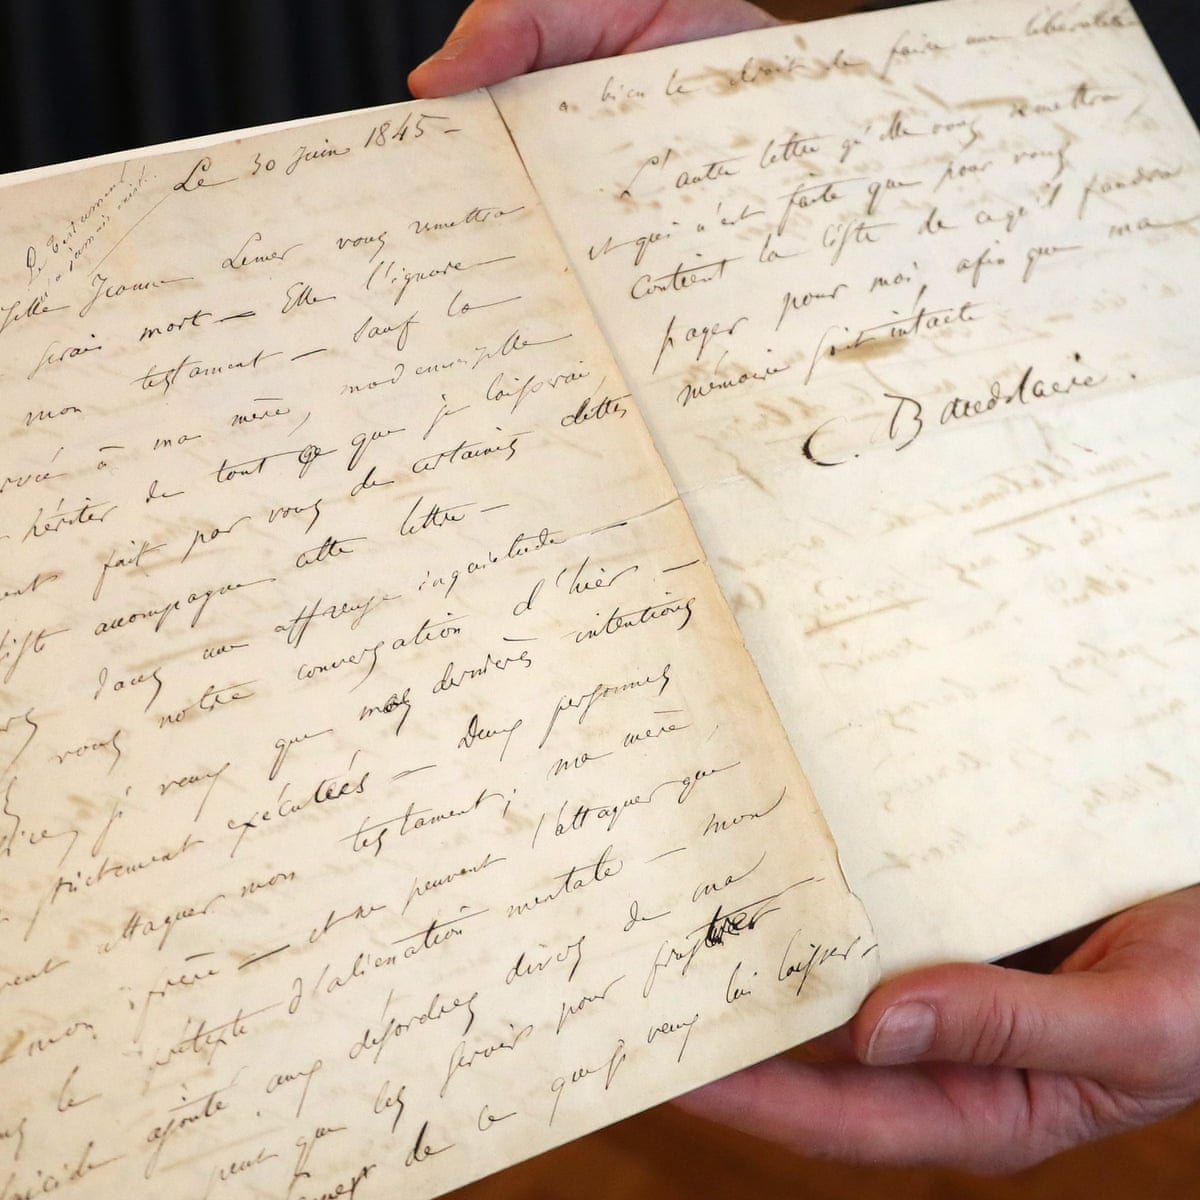 Baudelaire suicide letter fetches three times estimated price at